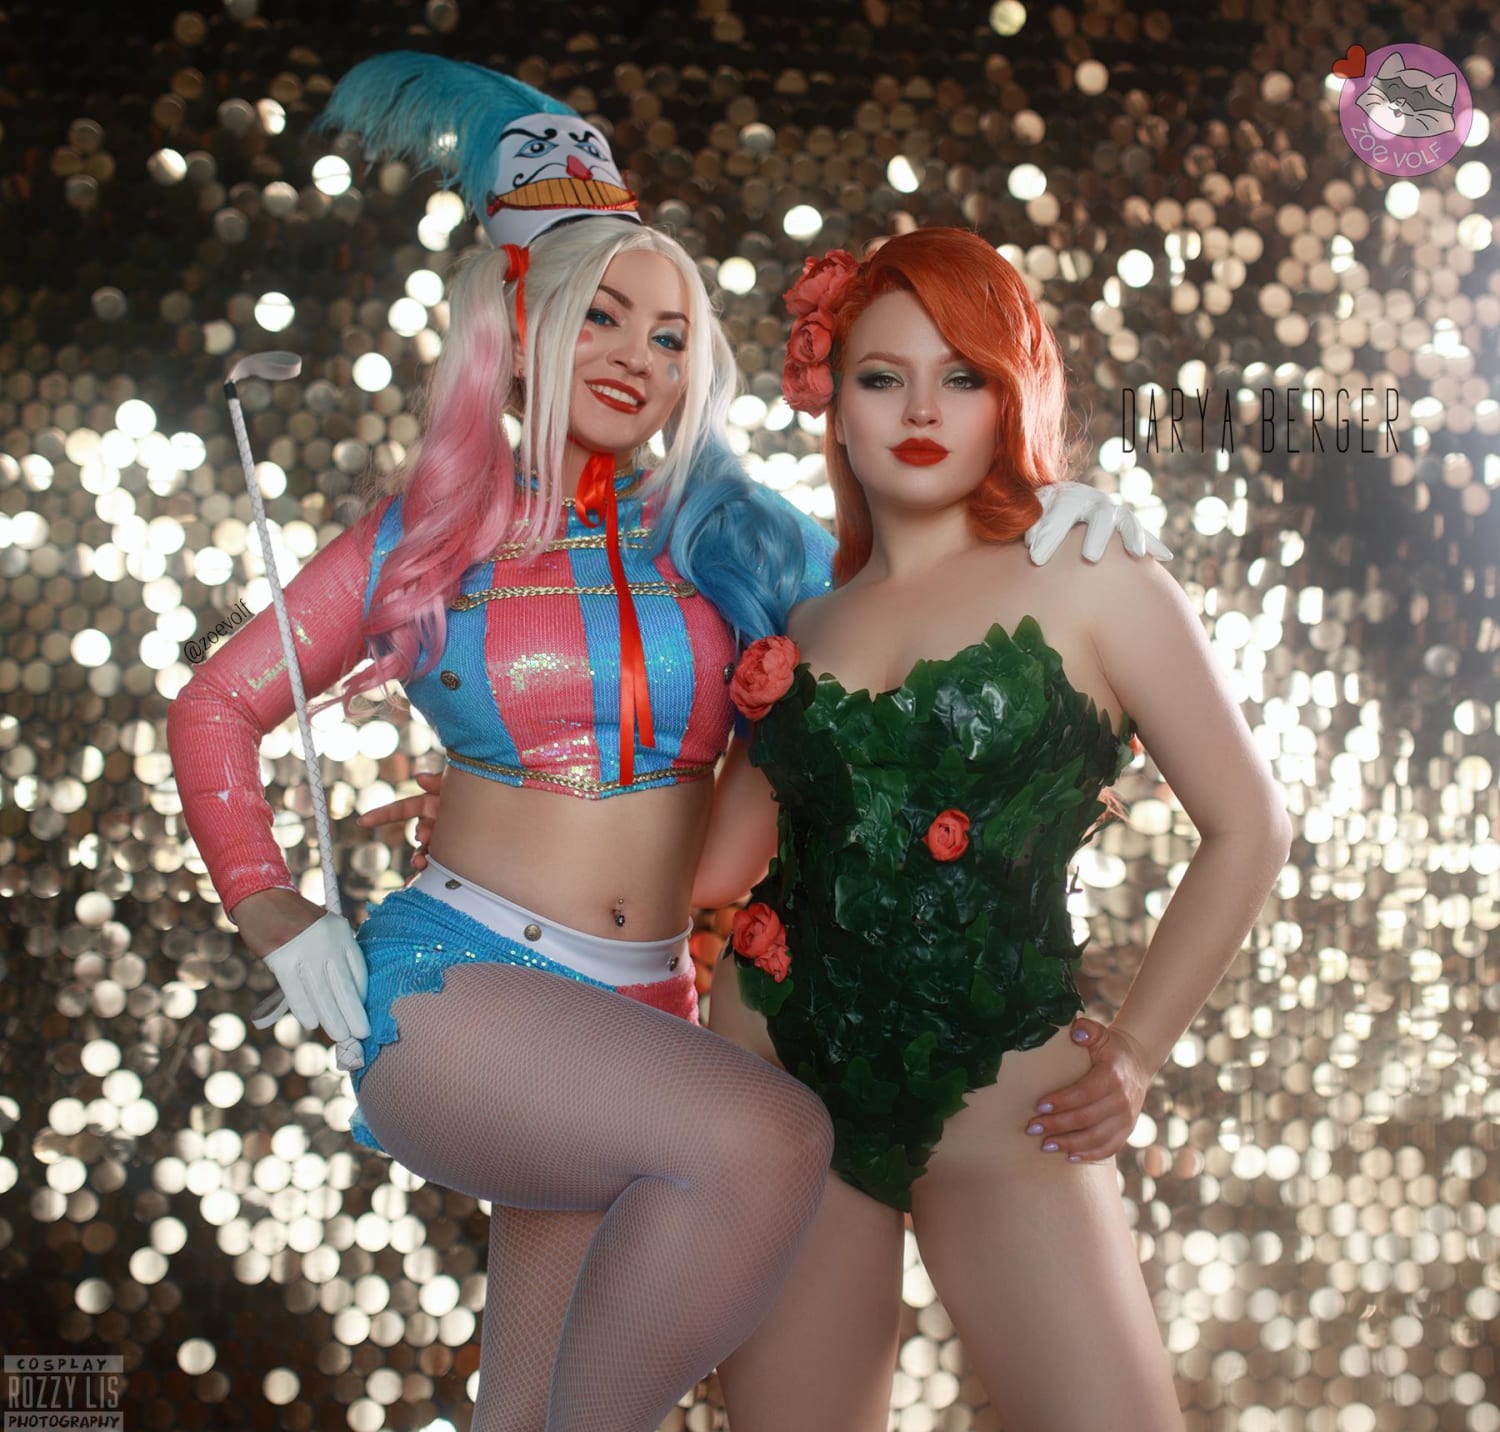 [Cosplay] Me as Harley Quinn with Darya Berger as Poison Ivy